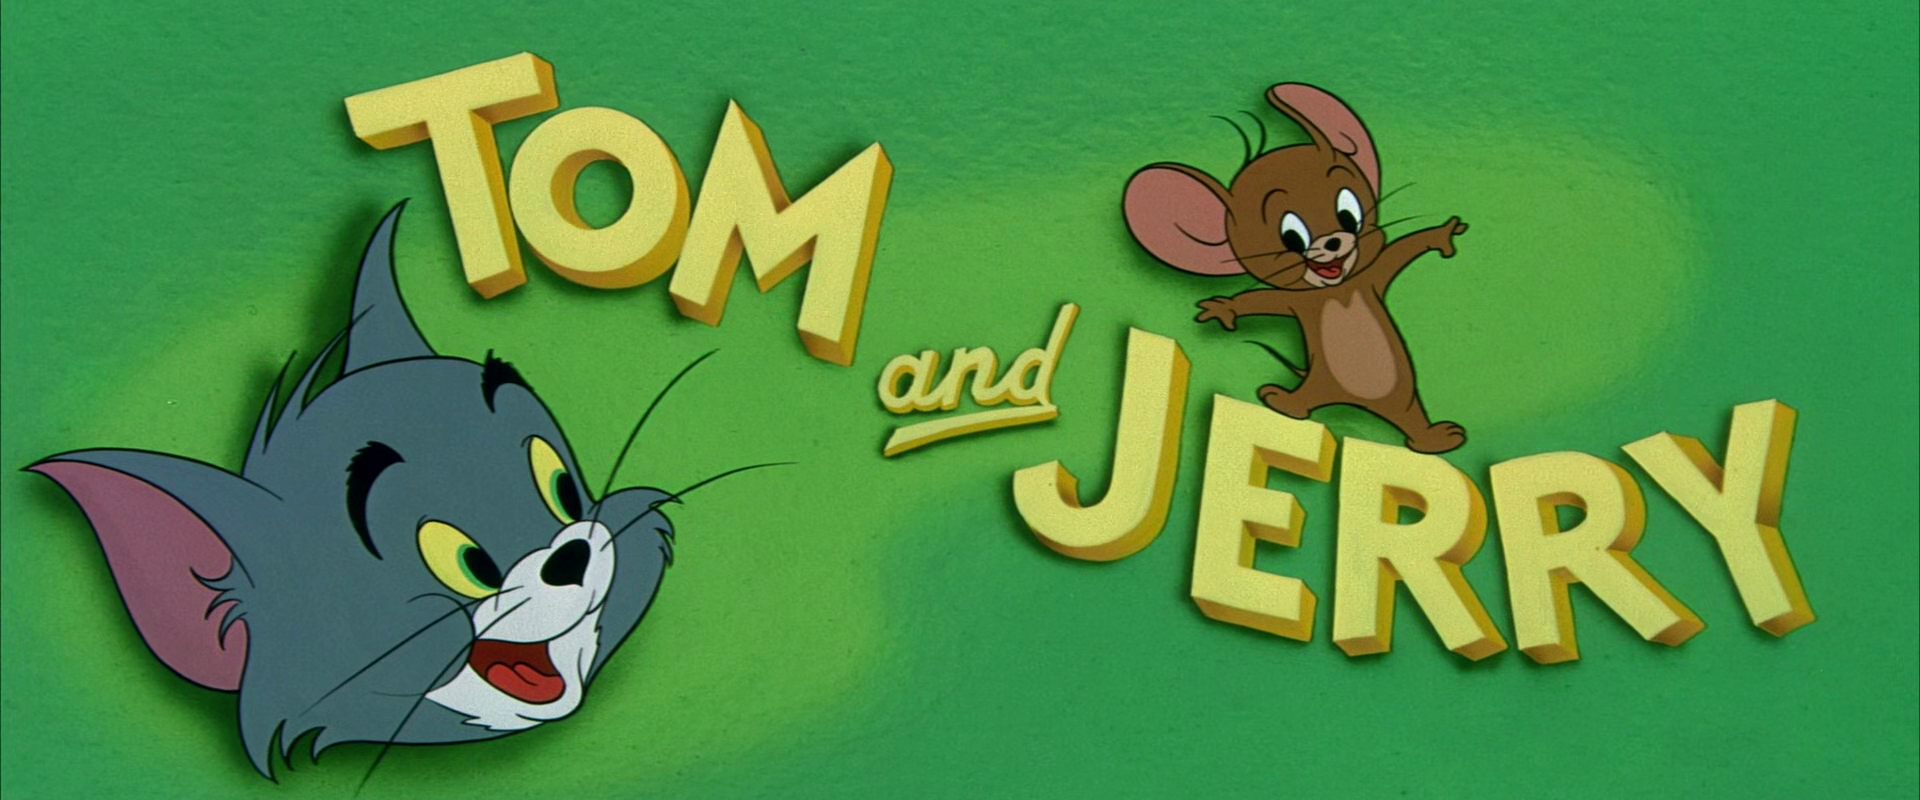 download tom and jerry by fred quimby